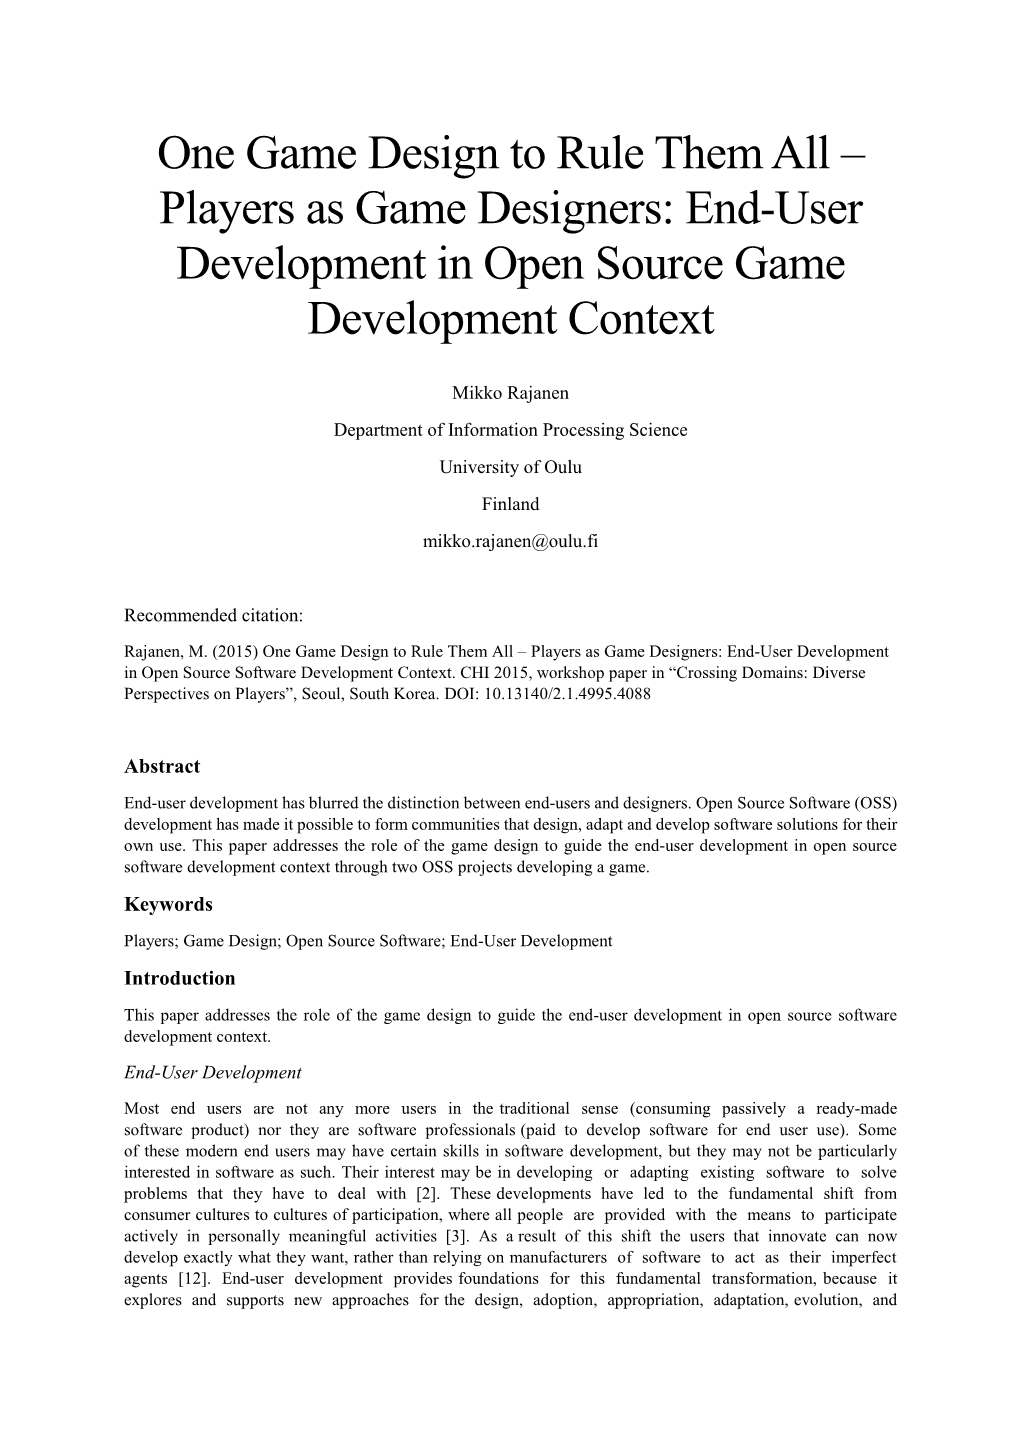 One Game Design to Rule Them All – Players As Game Designers: End-User Development in Open Source Game Development Context